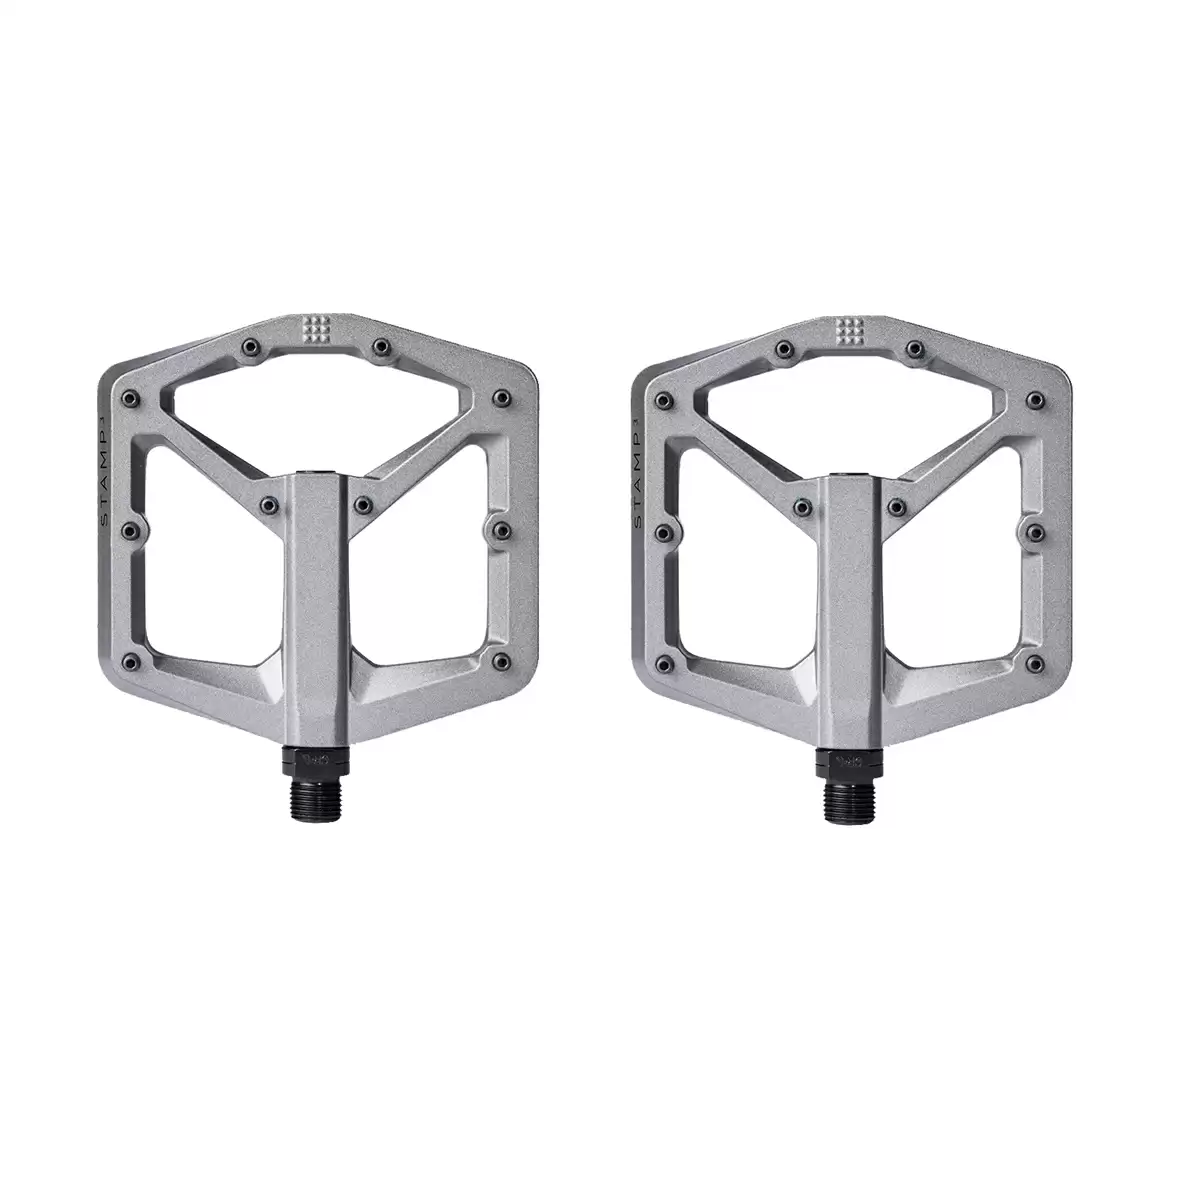 Pair of pedals Stamp 3 Large magnesium grey V2 - image